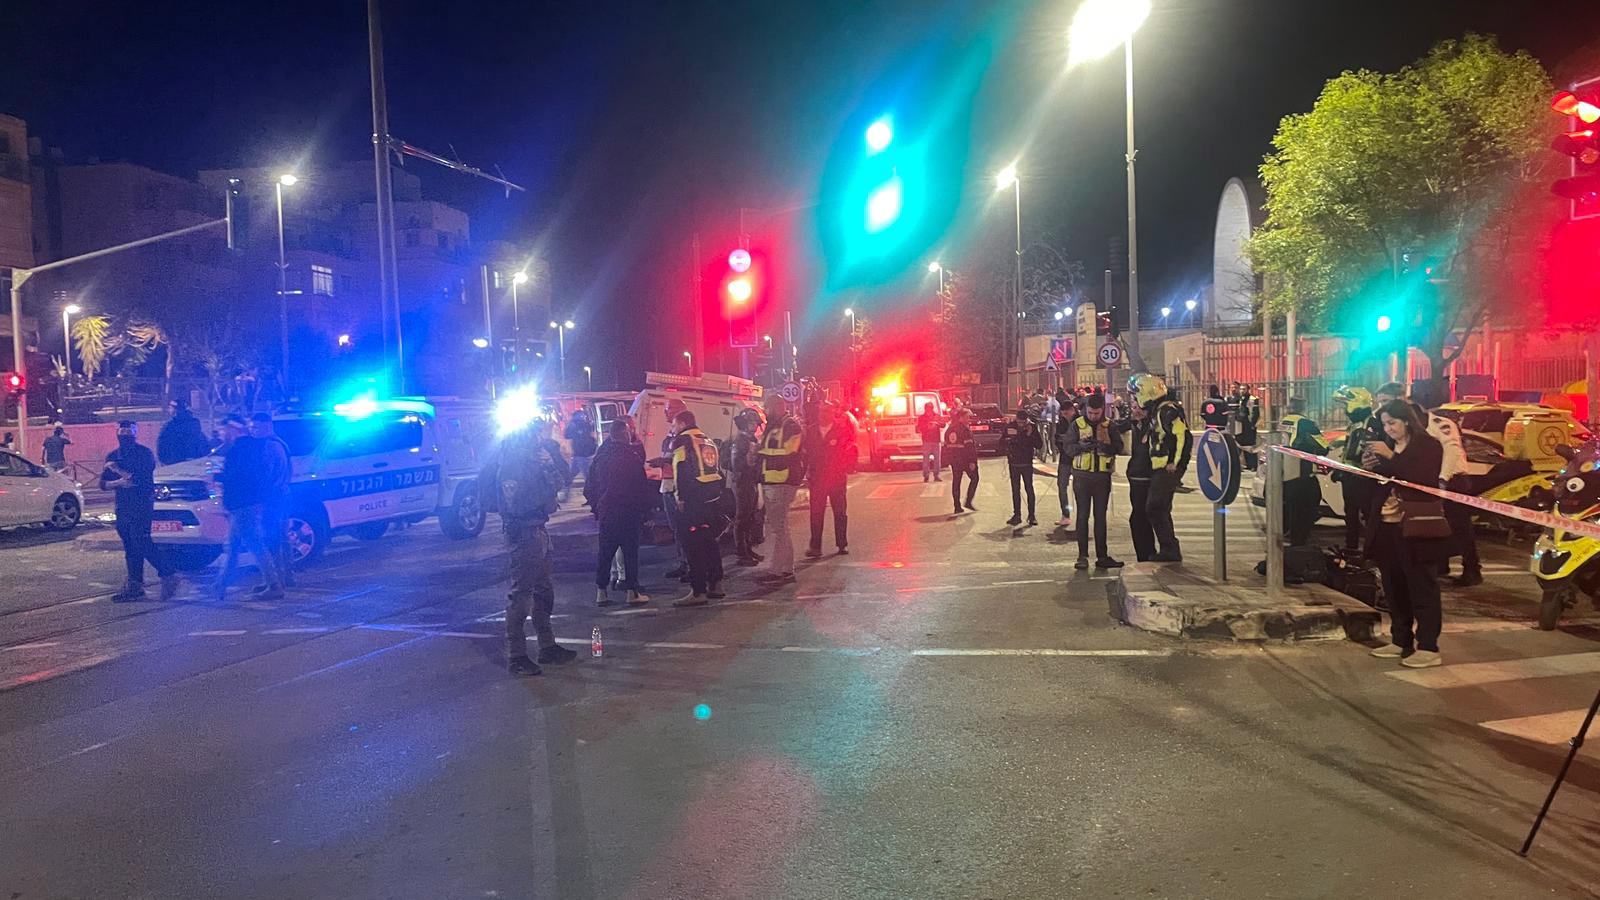 epa10434649 Emergency services work at the scene of a shooting at a synangogue in Neve Yaakov area of Jerusalem, Israel, 27 January 2023. According to a police spokesperson, at least eight people were killed and several injured in a shooting attack at a synagogue.  EPA/ATEF SAFADI